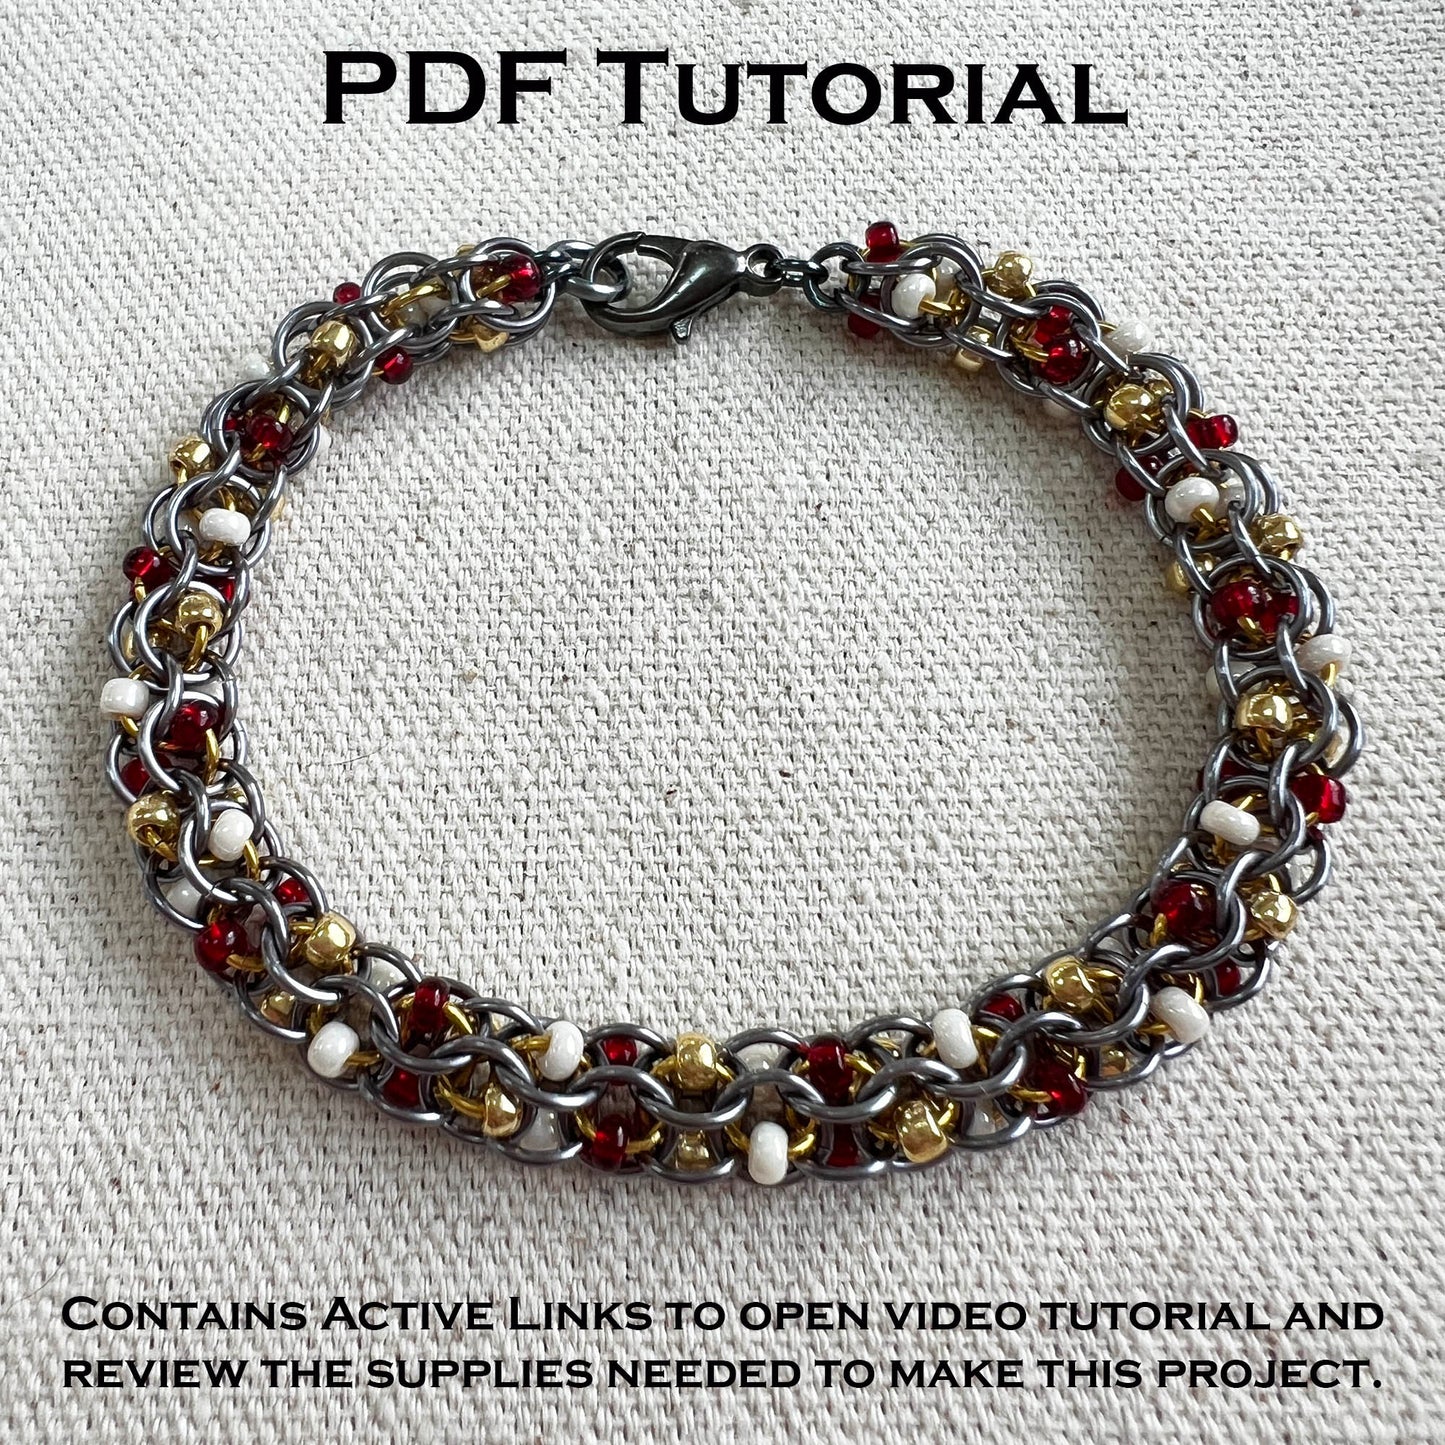 Captive 2 in 1 Chain Bracelet PDF Tutorial contains active links NO PHYSCAL SUPPLIES INCLUDED